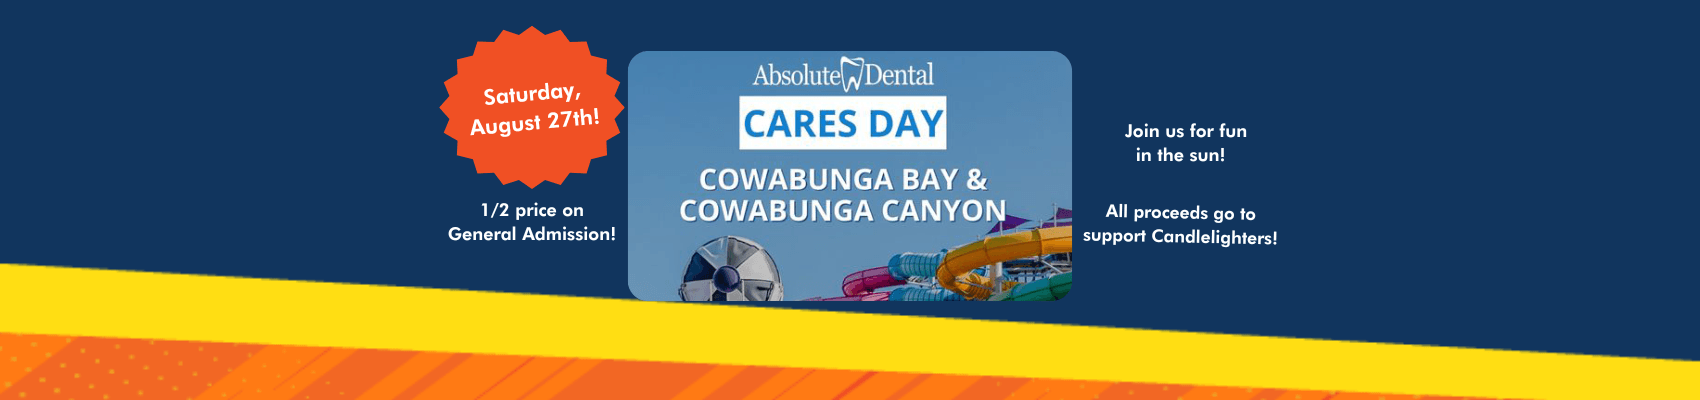 Absolute Dental Cares Day